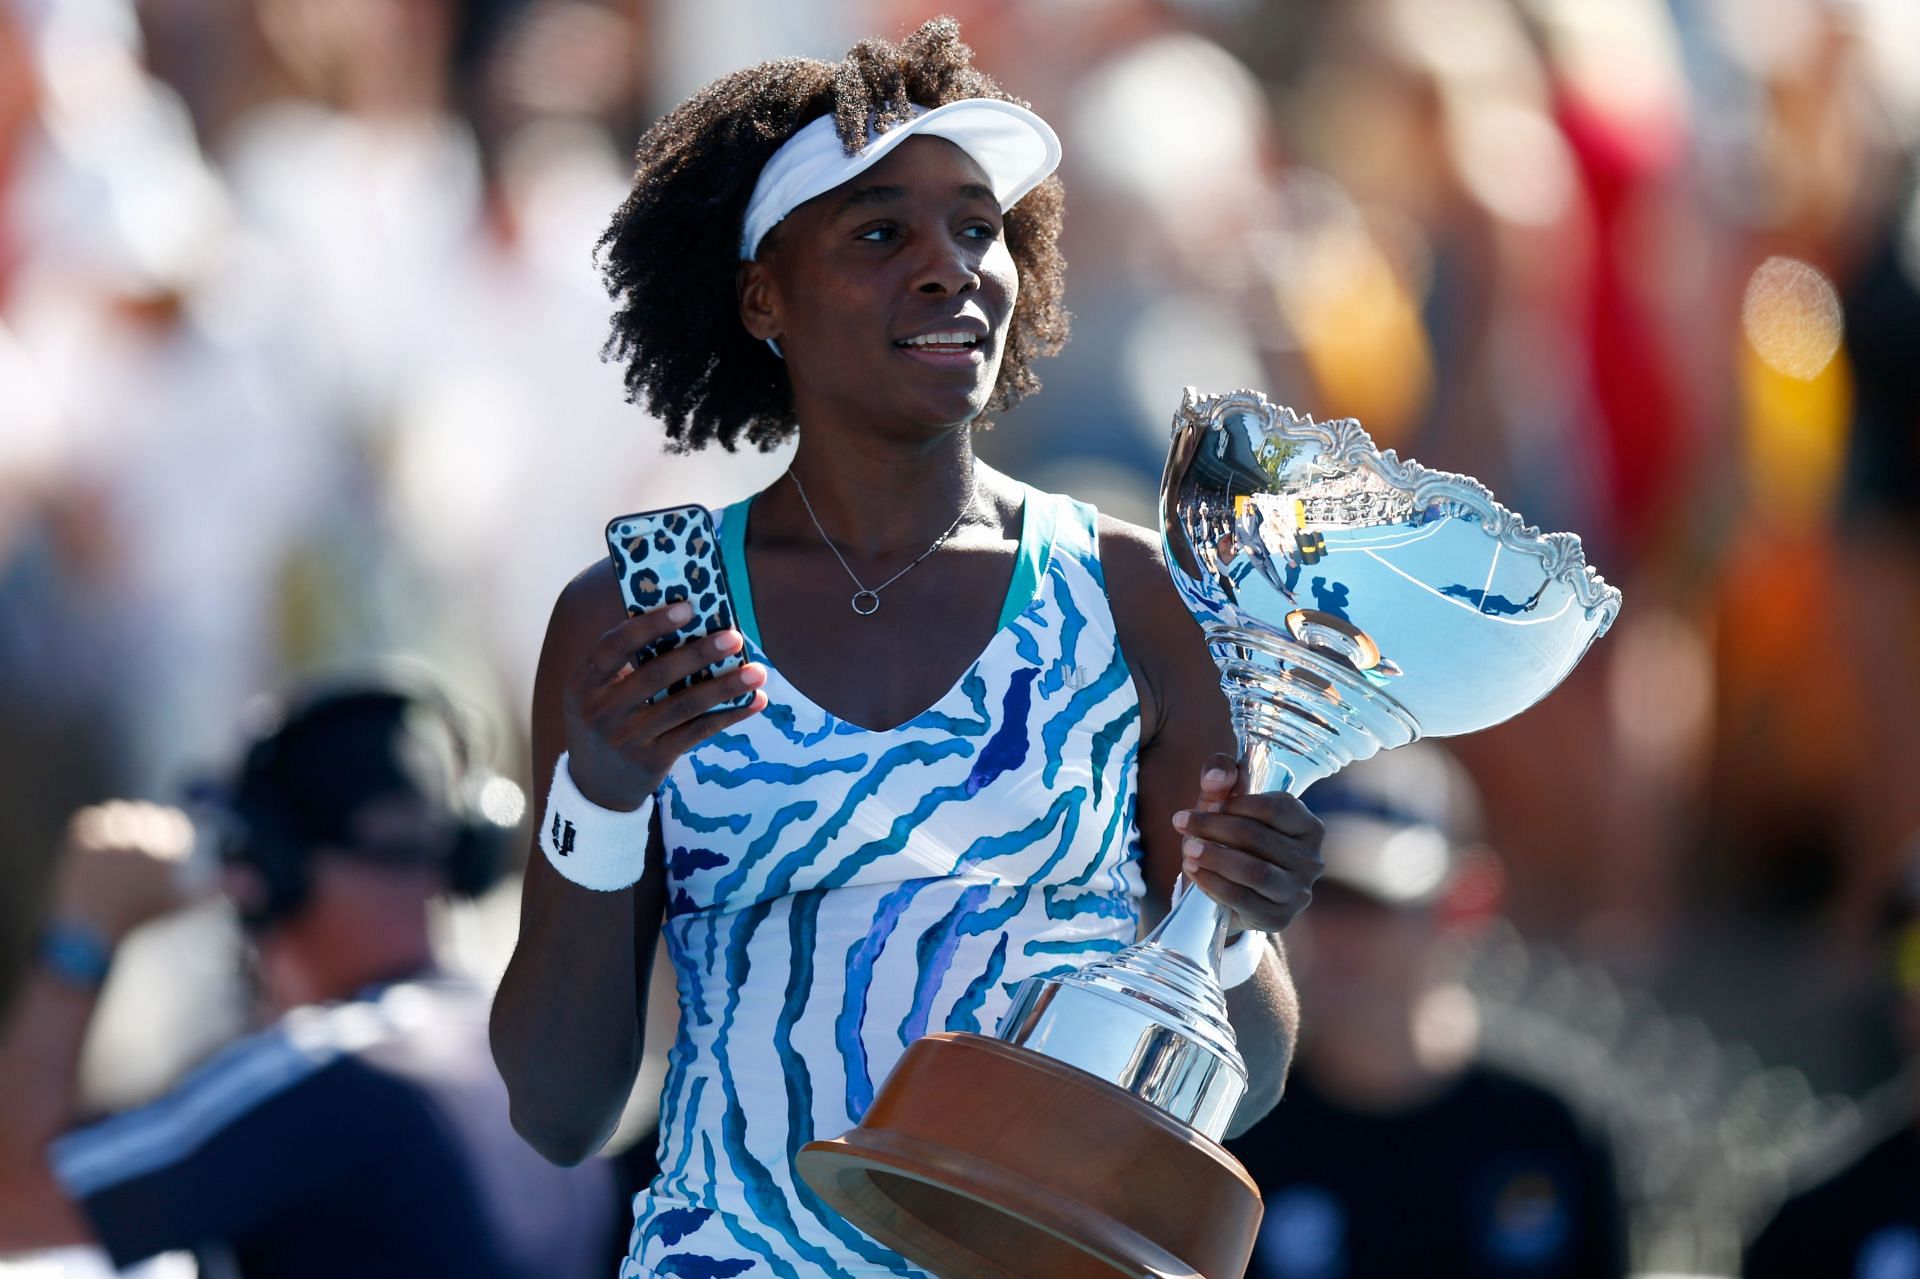 Venus Williams won the Auckland Open for the first time in 2015